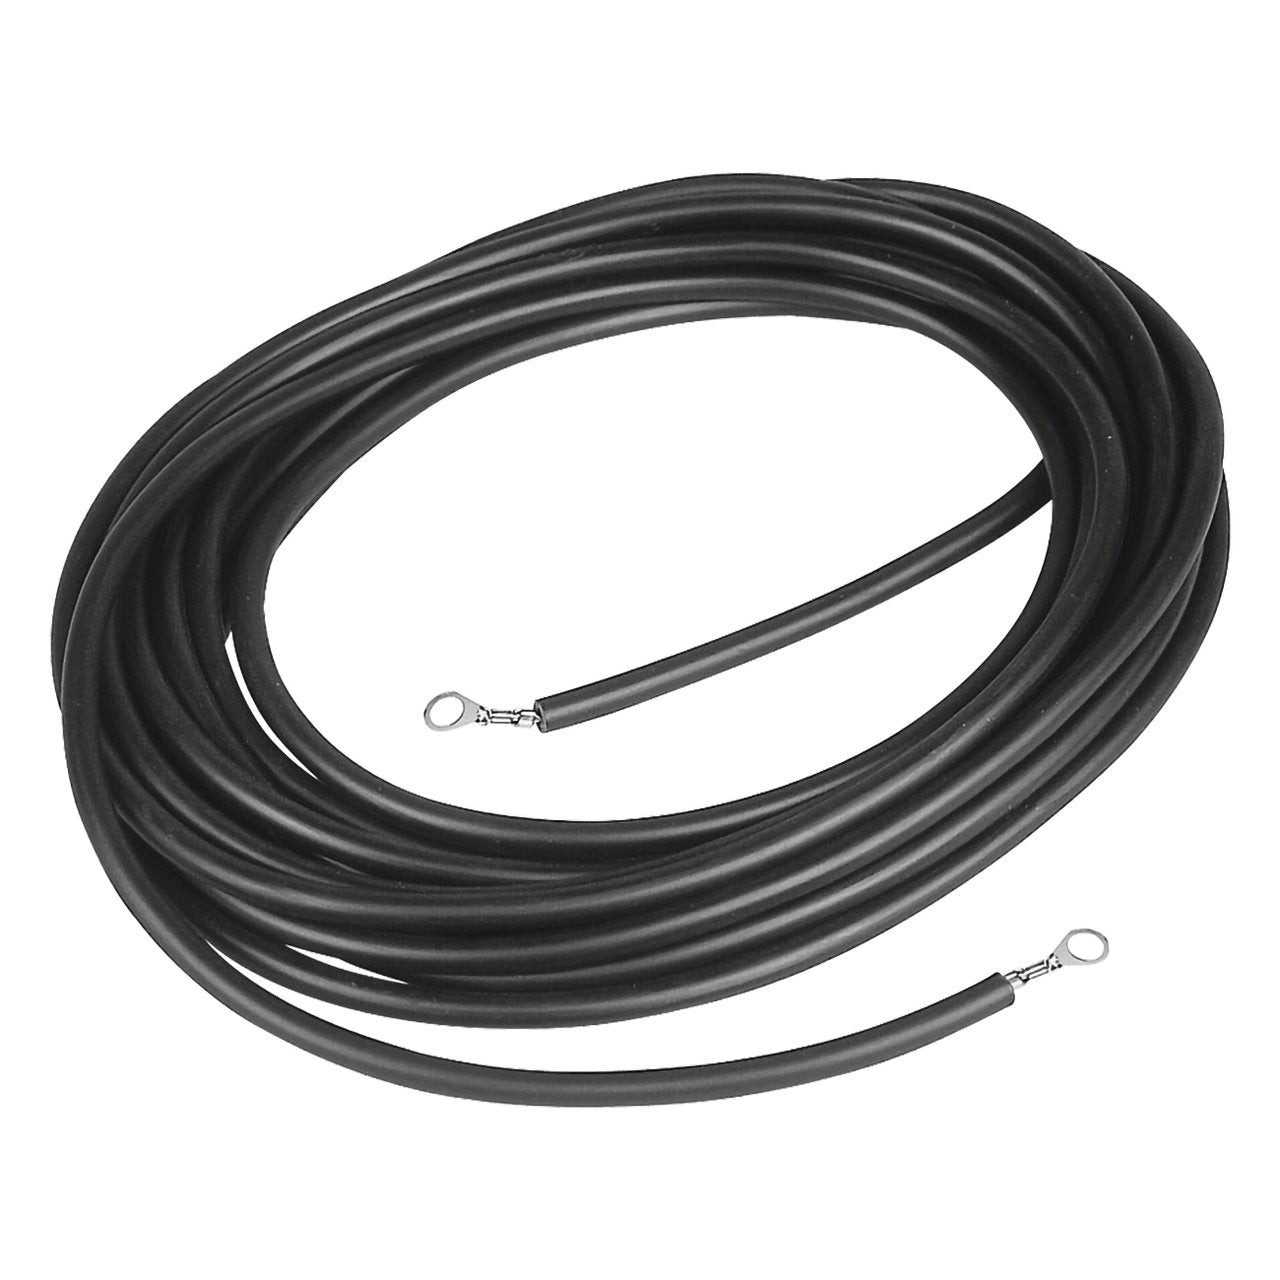 CORRAL Fence/Earth Connection Cable 3M (446350